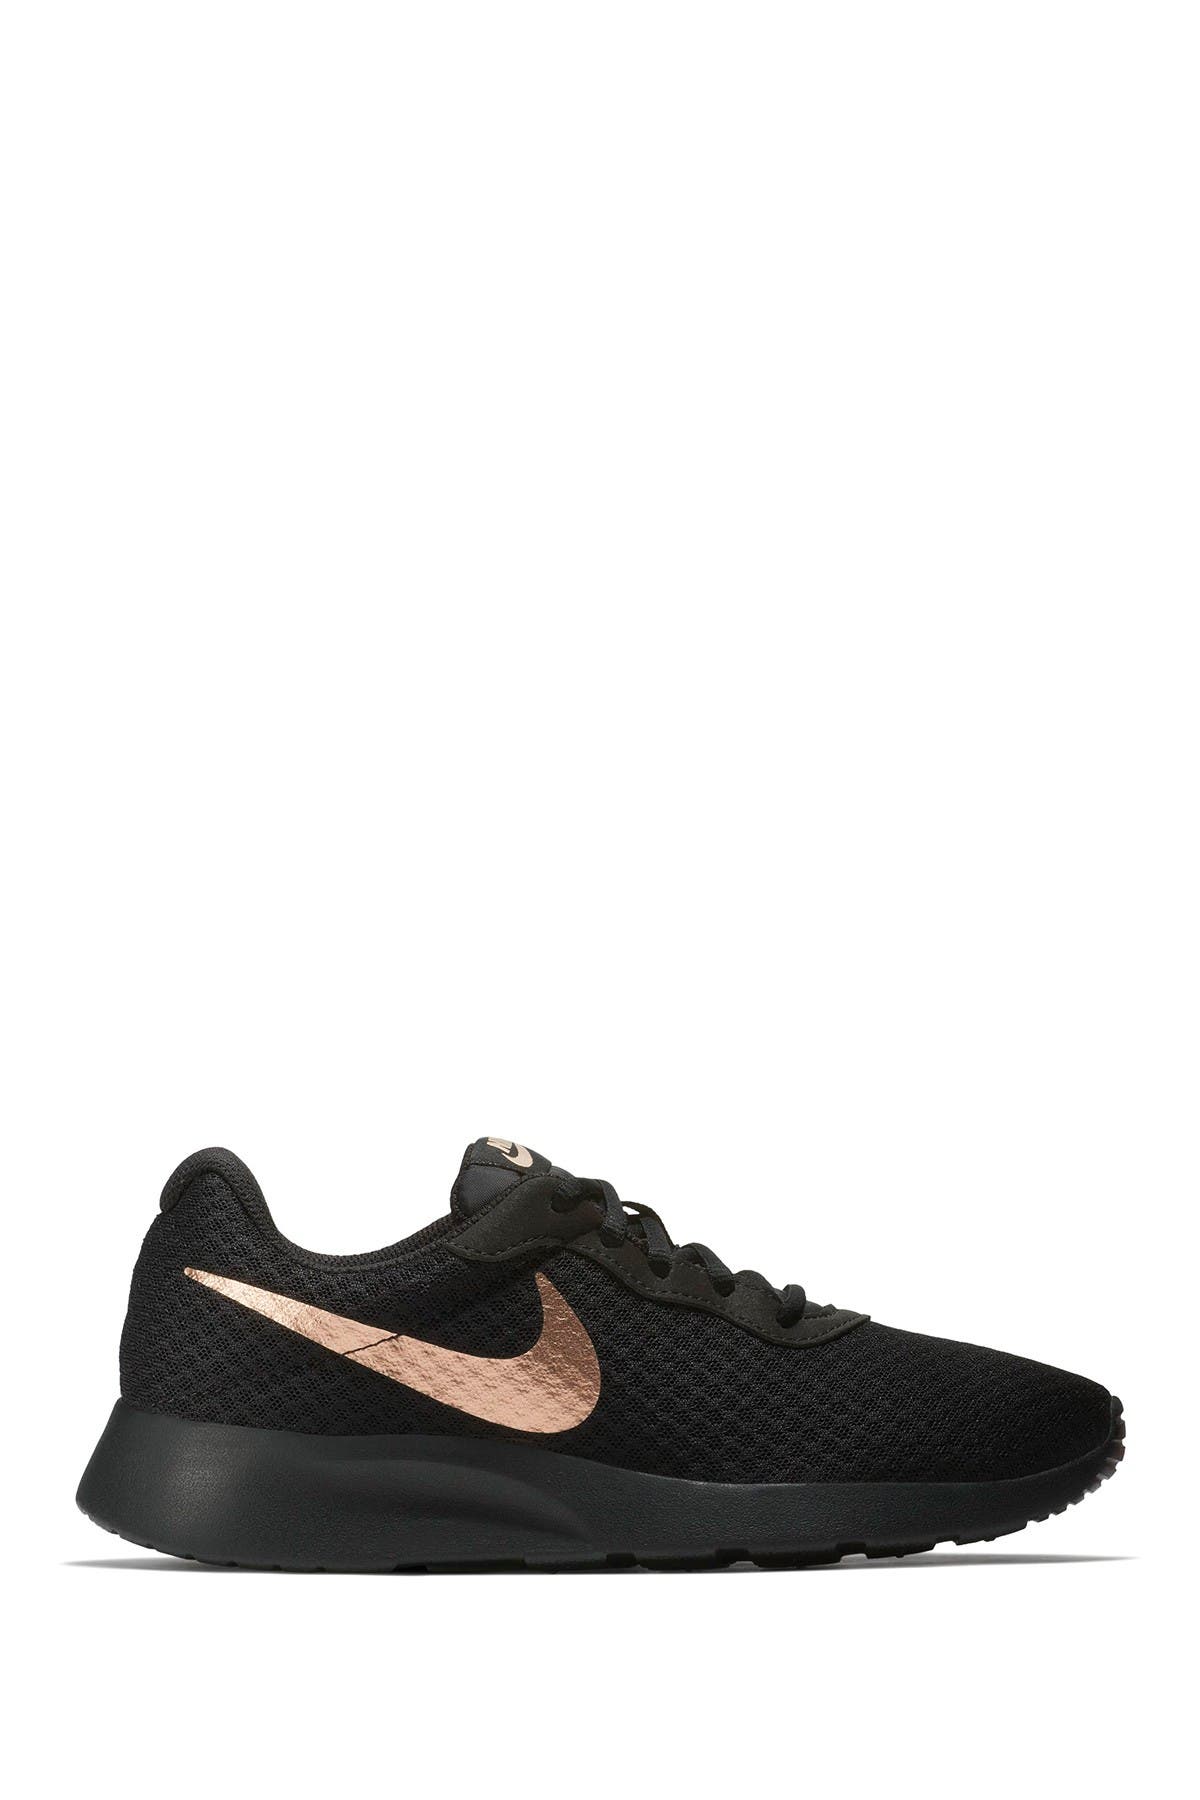 black nike with rose gold swoosh